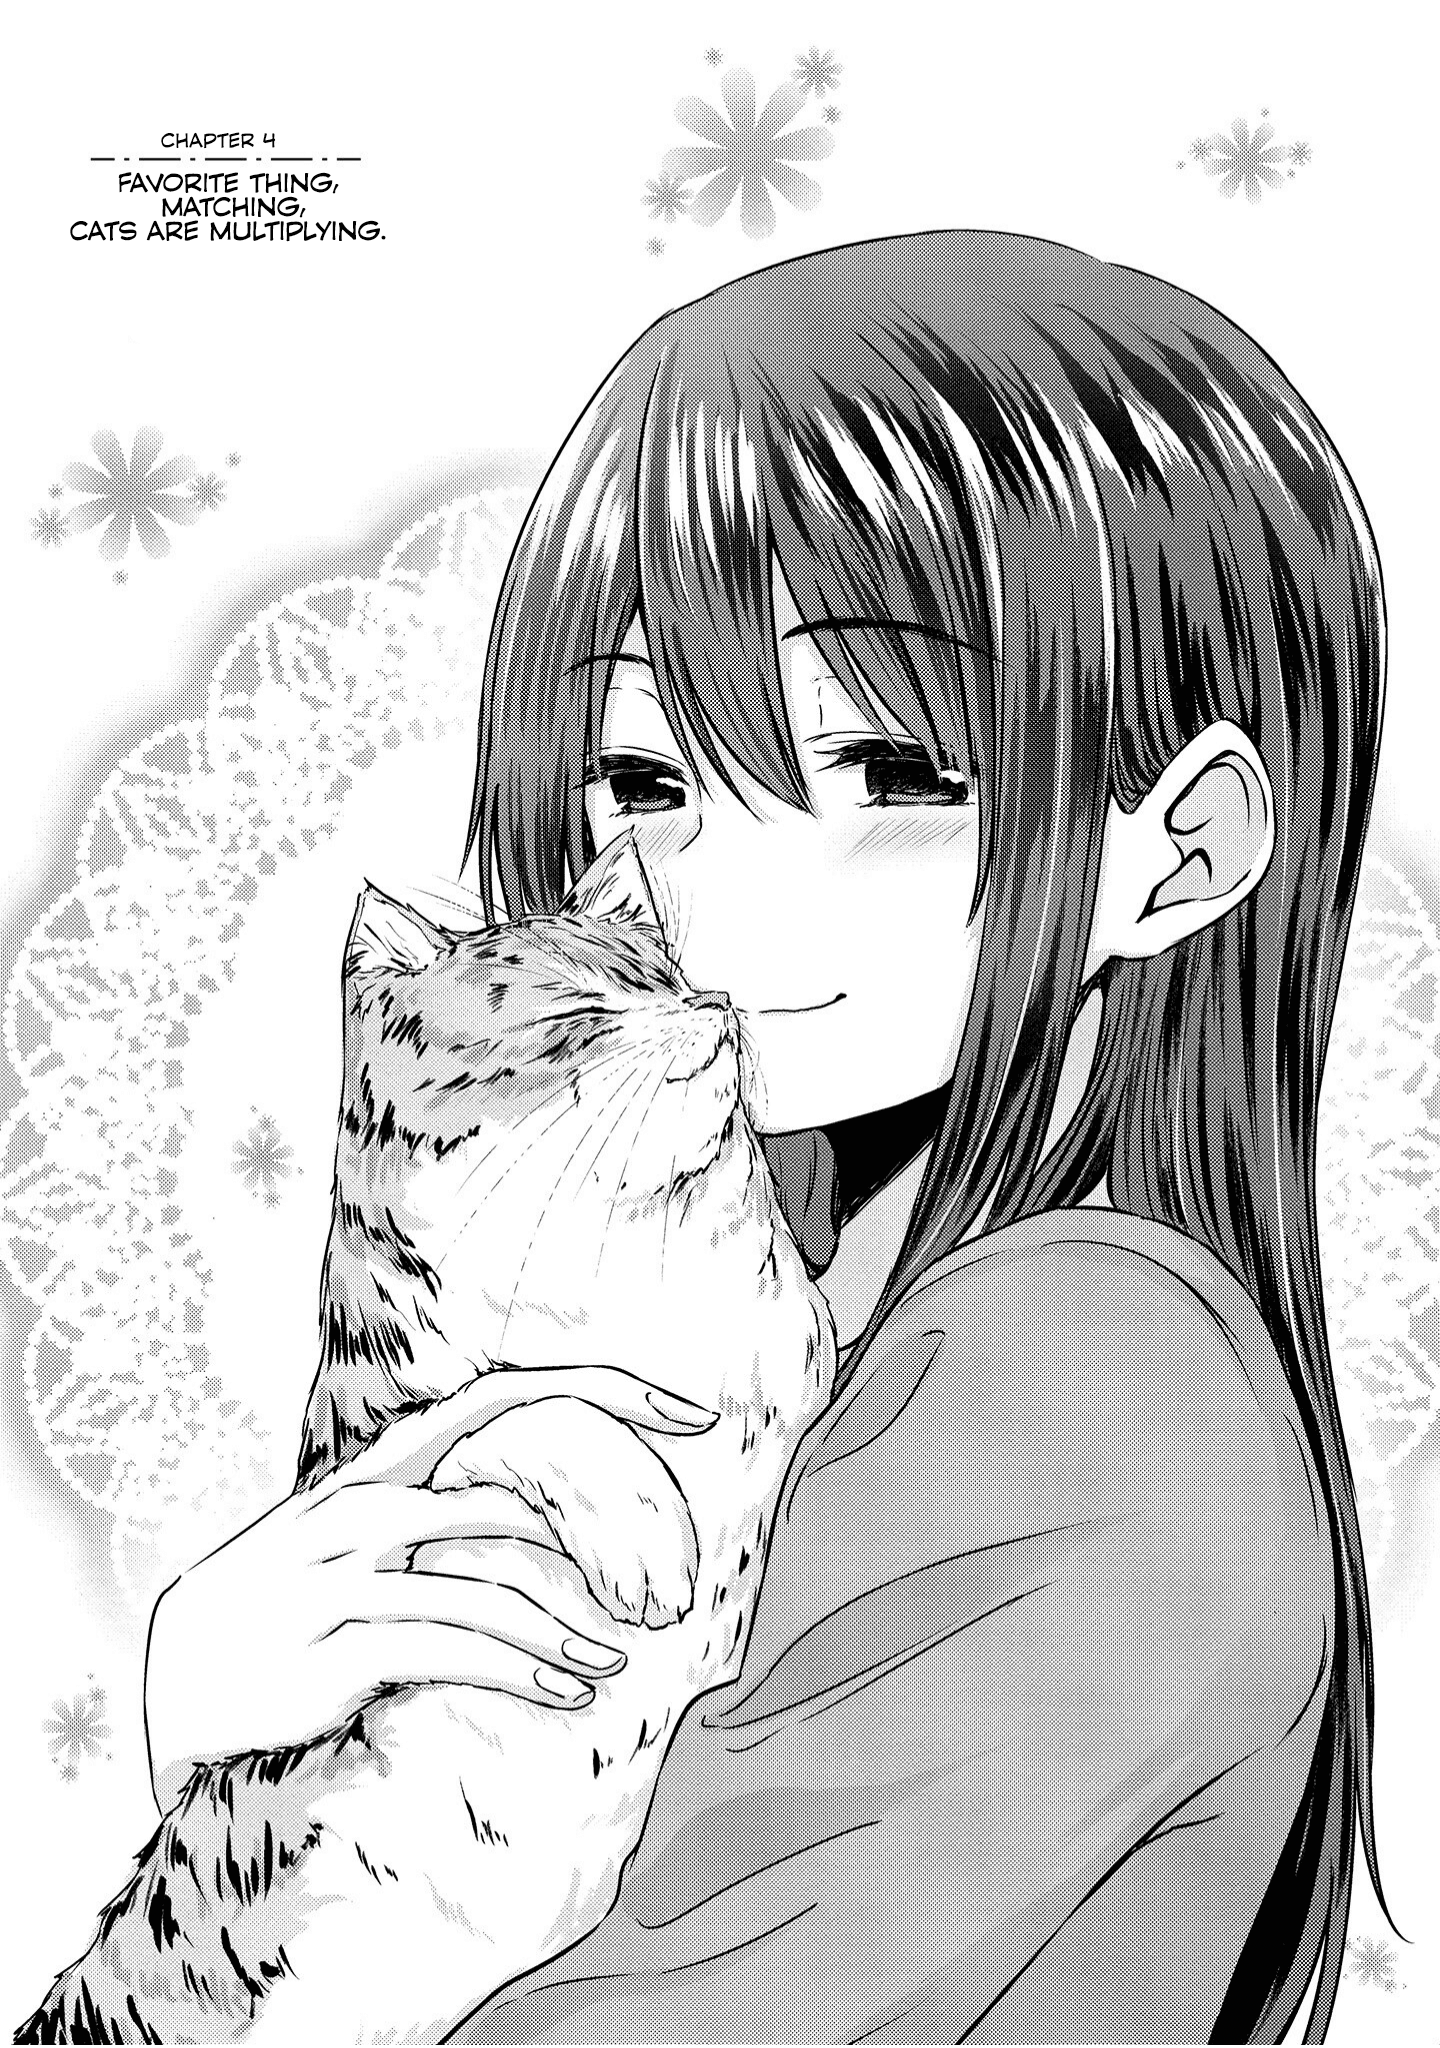 Ienai Himitsu No Aishikata (Serialised) Vol.1 Chapter 4: Favorite Thing, Matching, Cats Are Multiplying - Picture 1